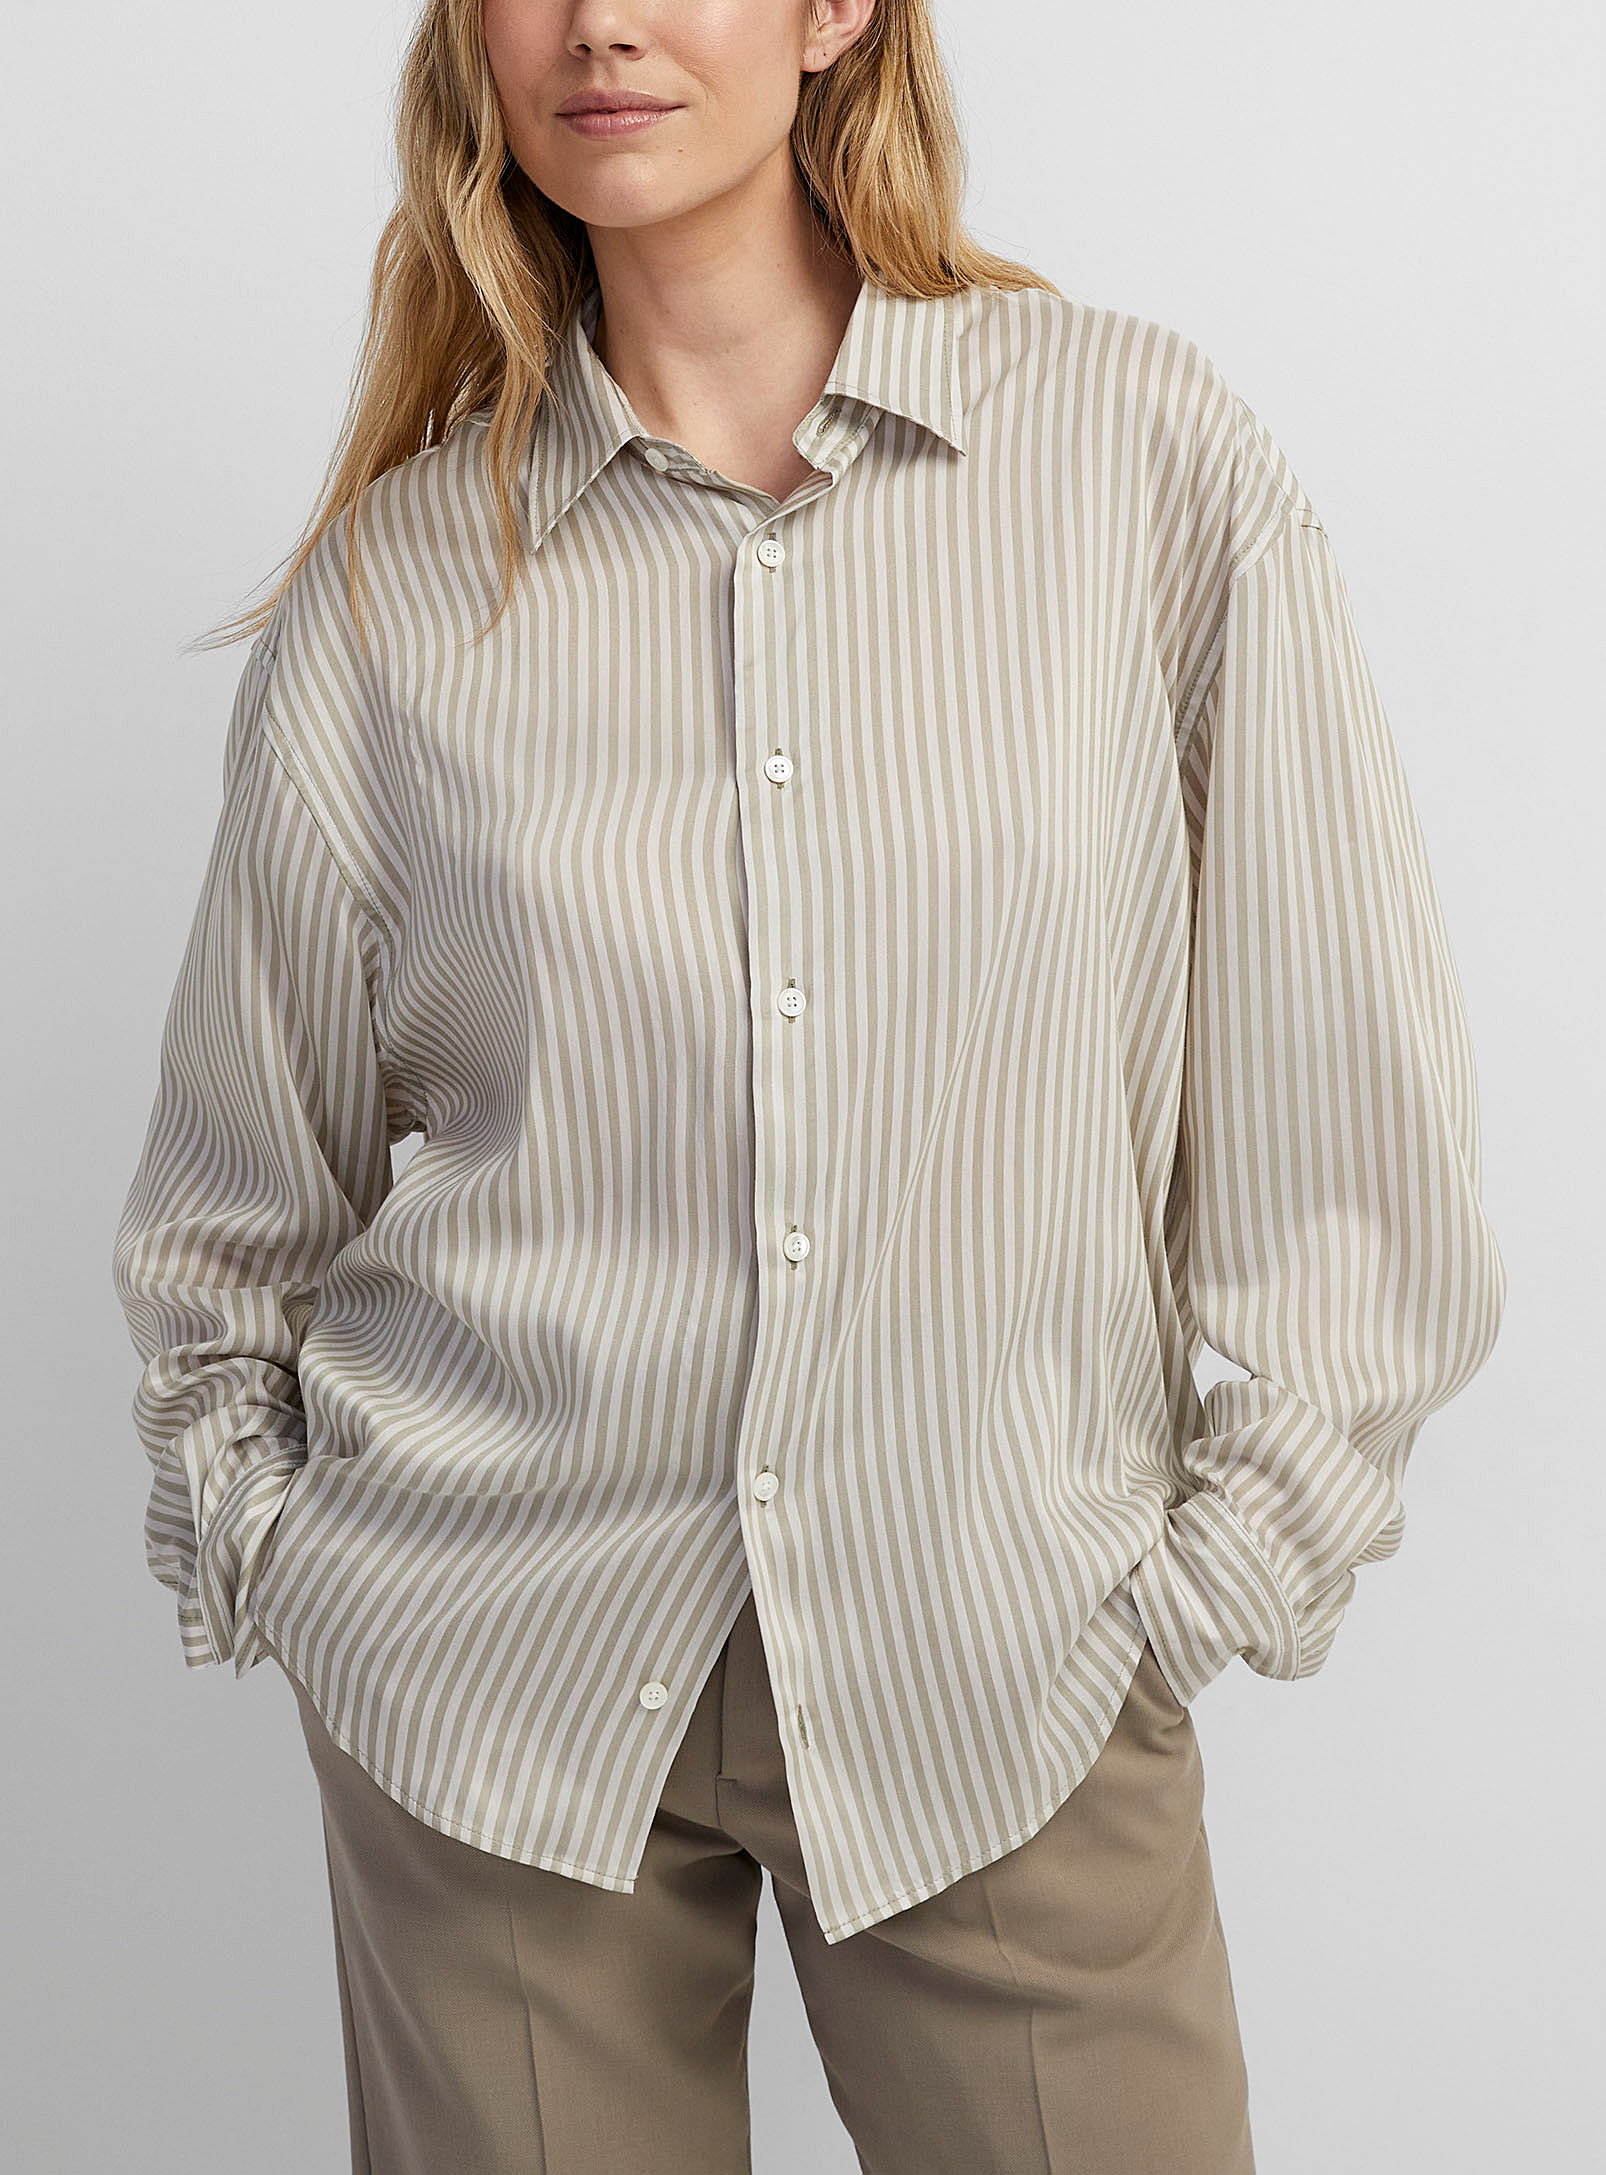 Ami - Women's Touch of silk striped shirt Boxy fit